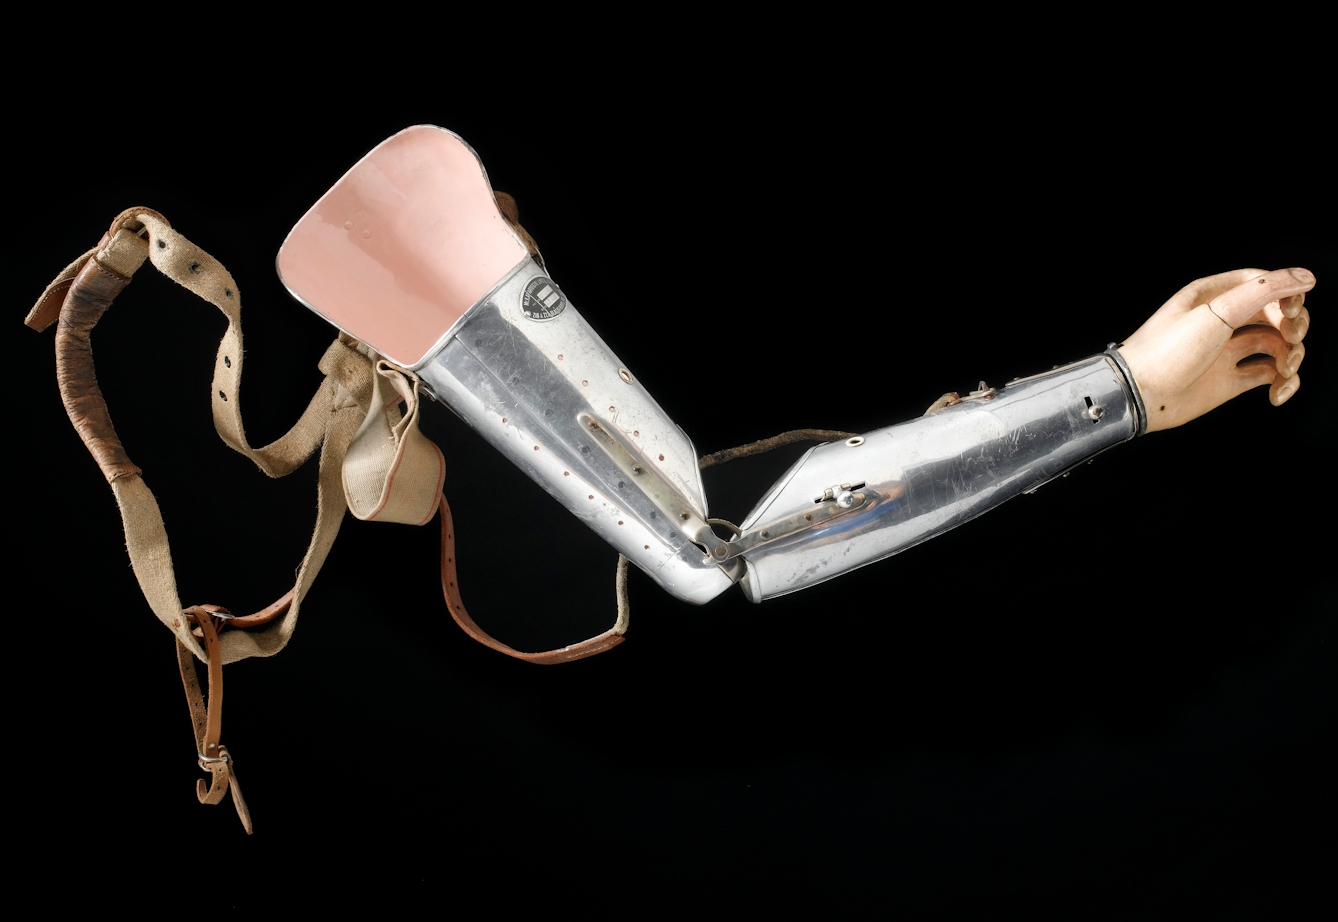 Made from aluminium, this prosthetic left arm from 1927 has a canvas coated hand to give the appearance of a gloved hand. The fingers of the hand are set in position, but the joints of the arm are adjustable and the hand is removable. Aluminium was preferred to wood as it was much lighter and was more comfortable for the wearer. As such it is one of a new generation of metal limbs that appeared in the 1920s and which gradually replaced the predominantly wooden ones. Among British forces alone, over 41,000 men lost one or more limbs during the First World War.